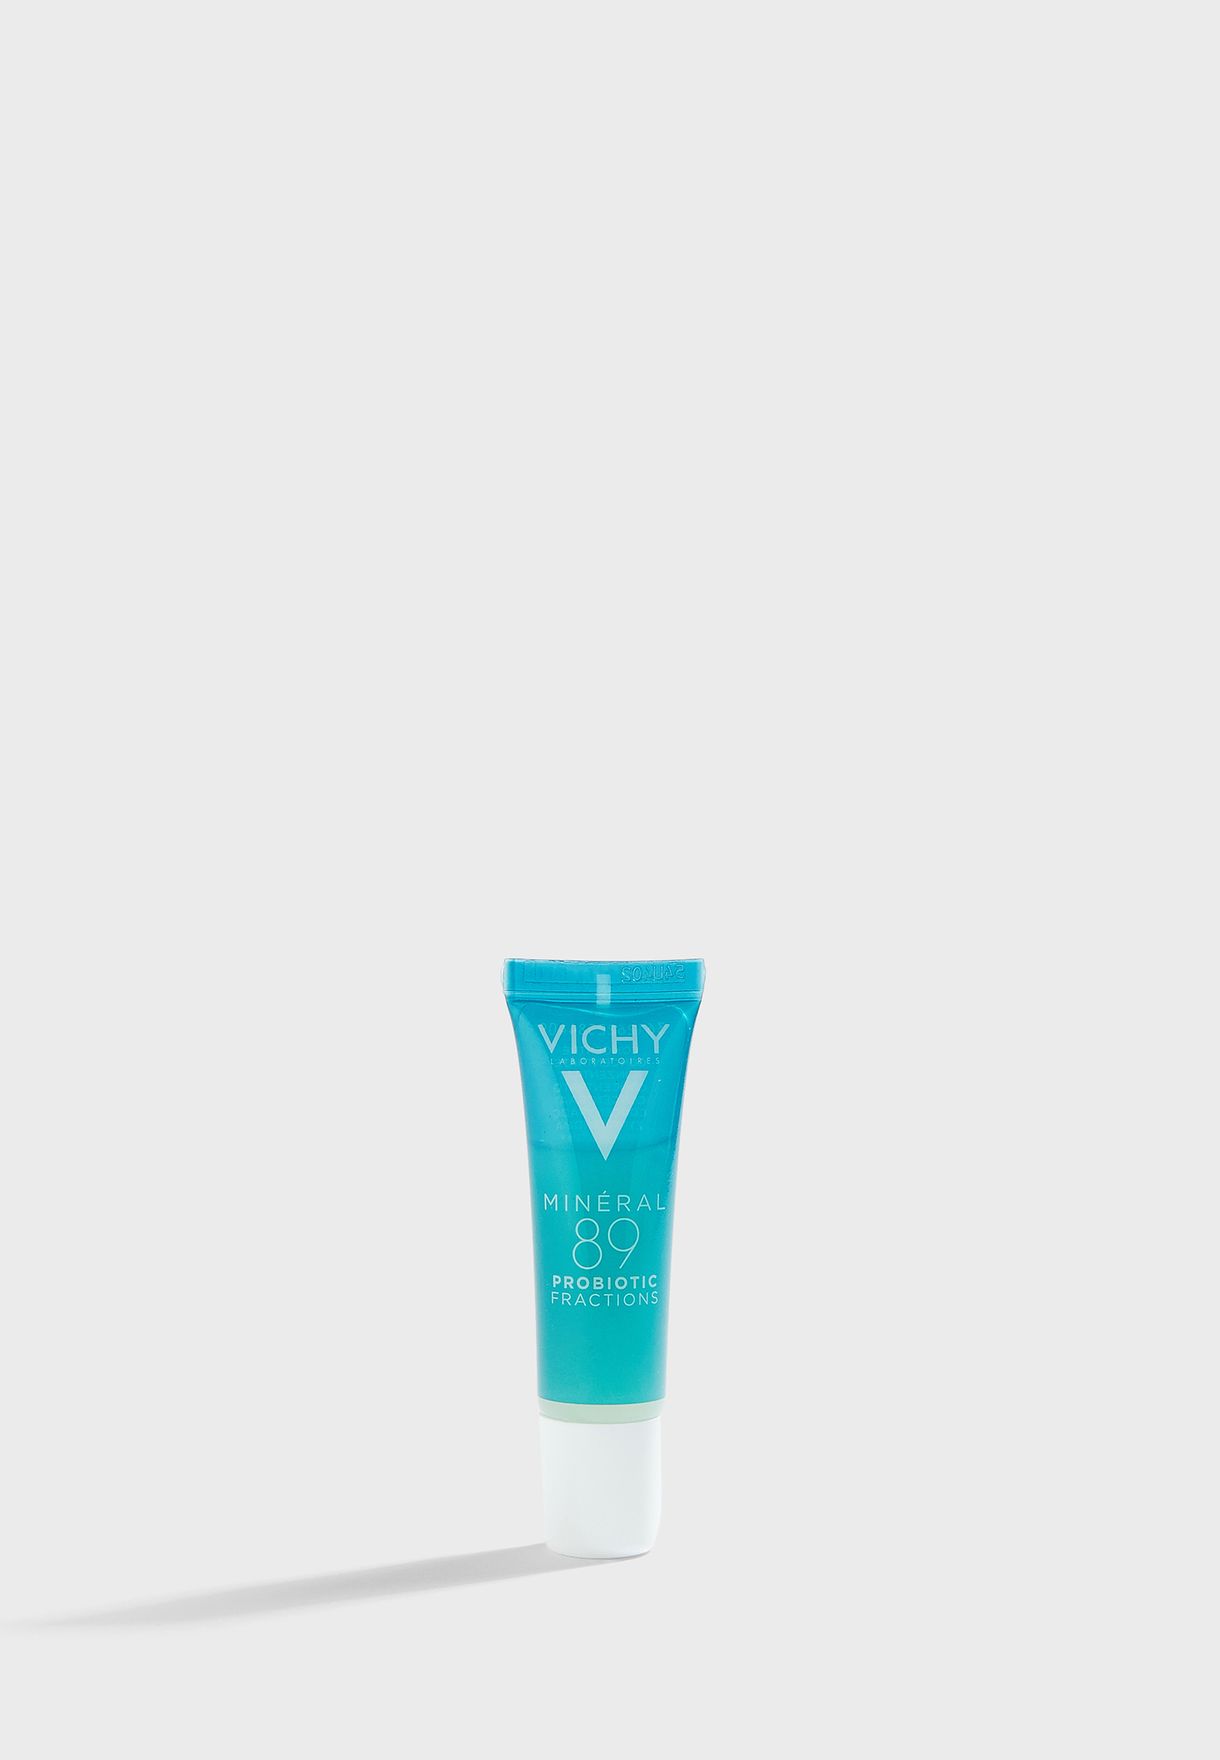 VICHY BEST SELLER ROUTINE: MINERAL 89+ LIFTACTIV 15% VITAMIN C + 2FREE MINIS